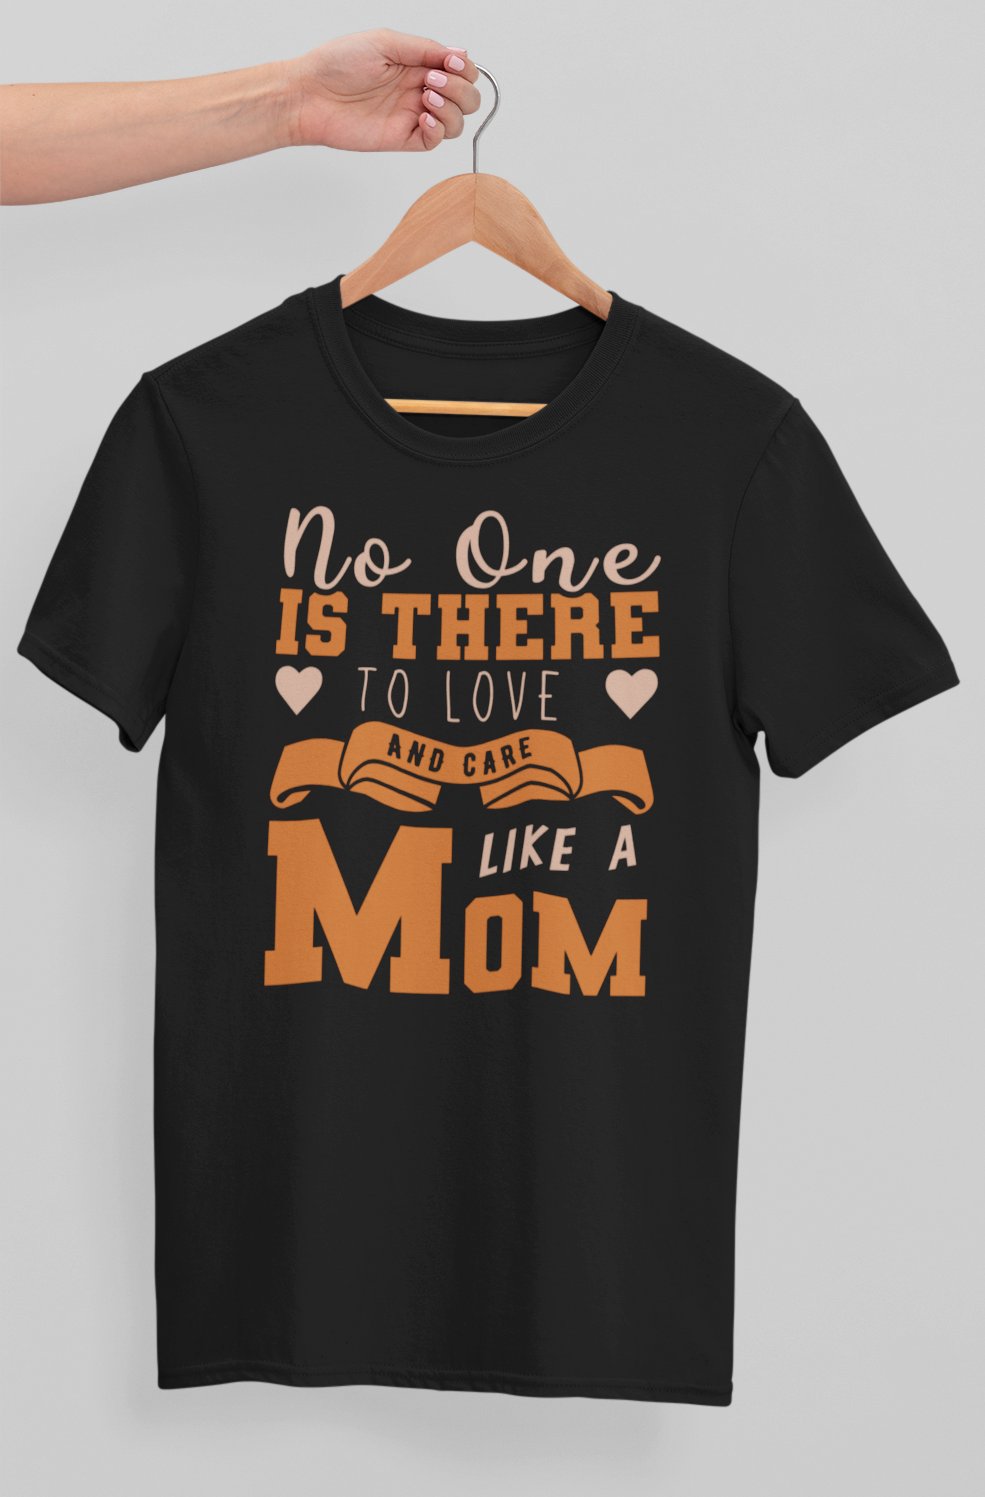 No one Is There To Love And Care Like A Mom T-shirt